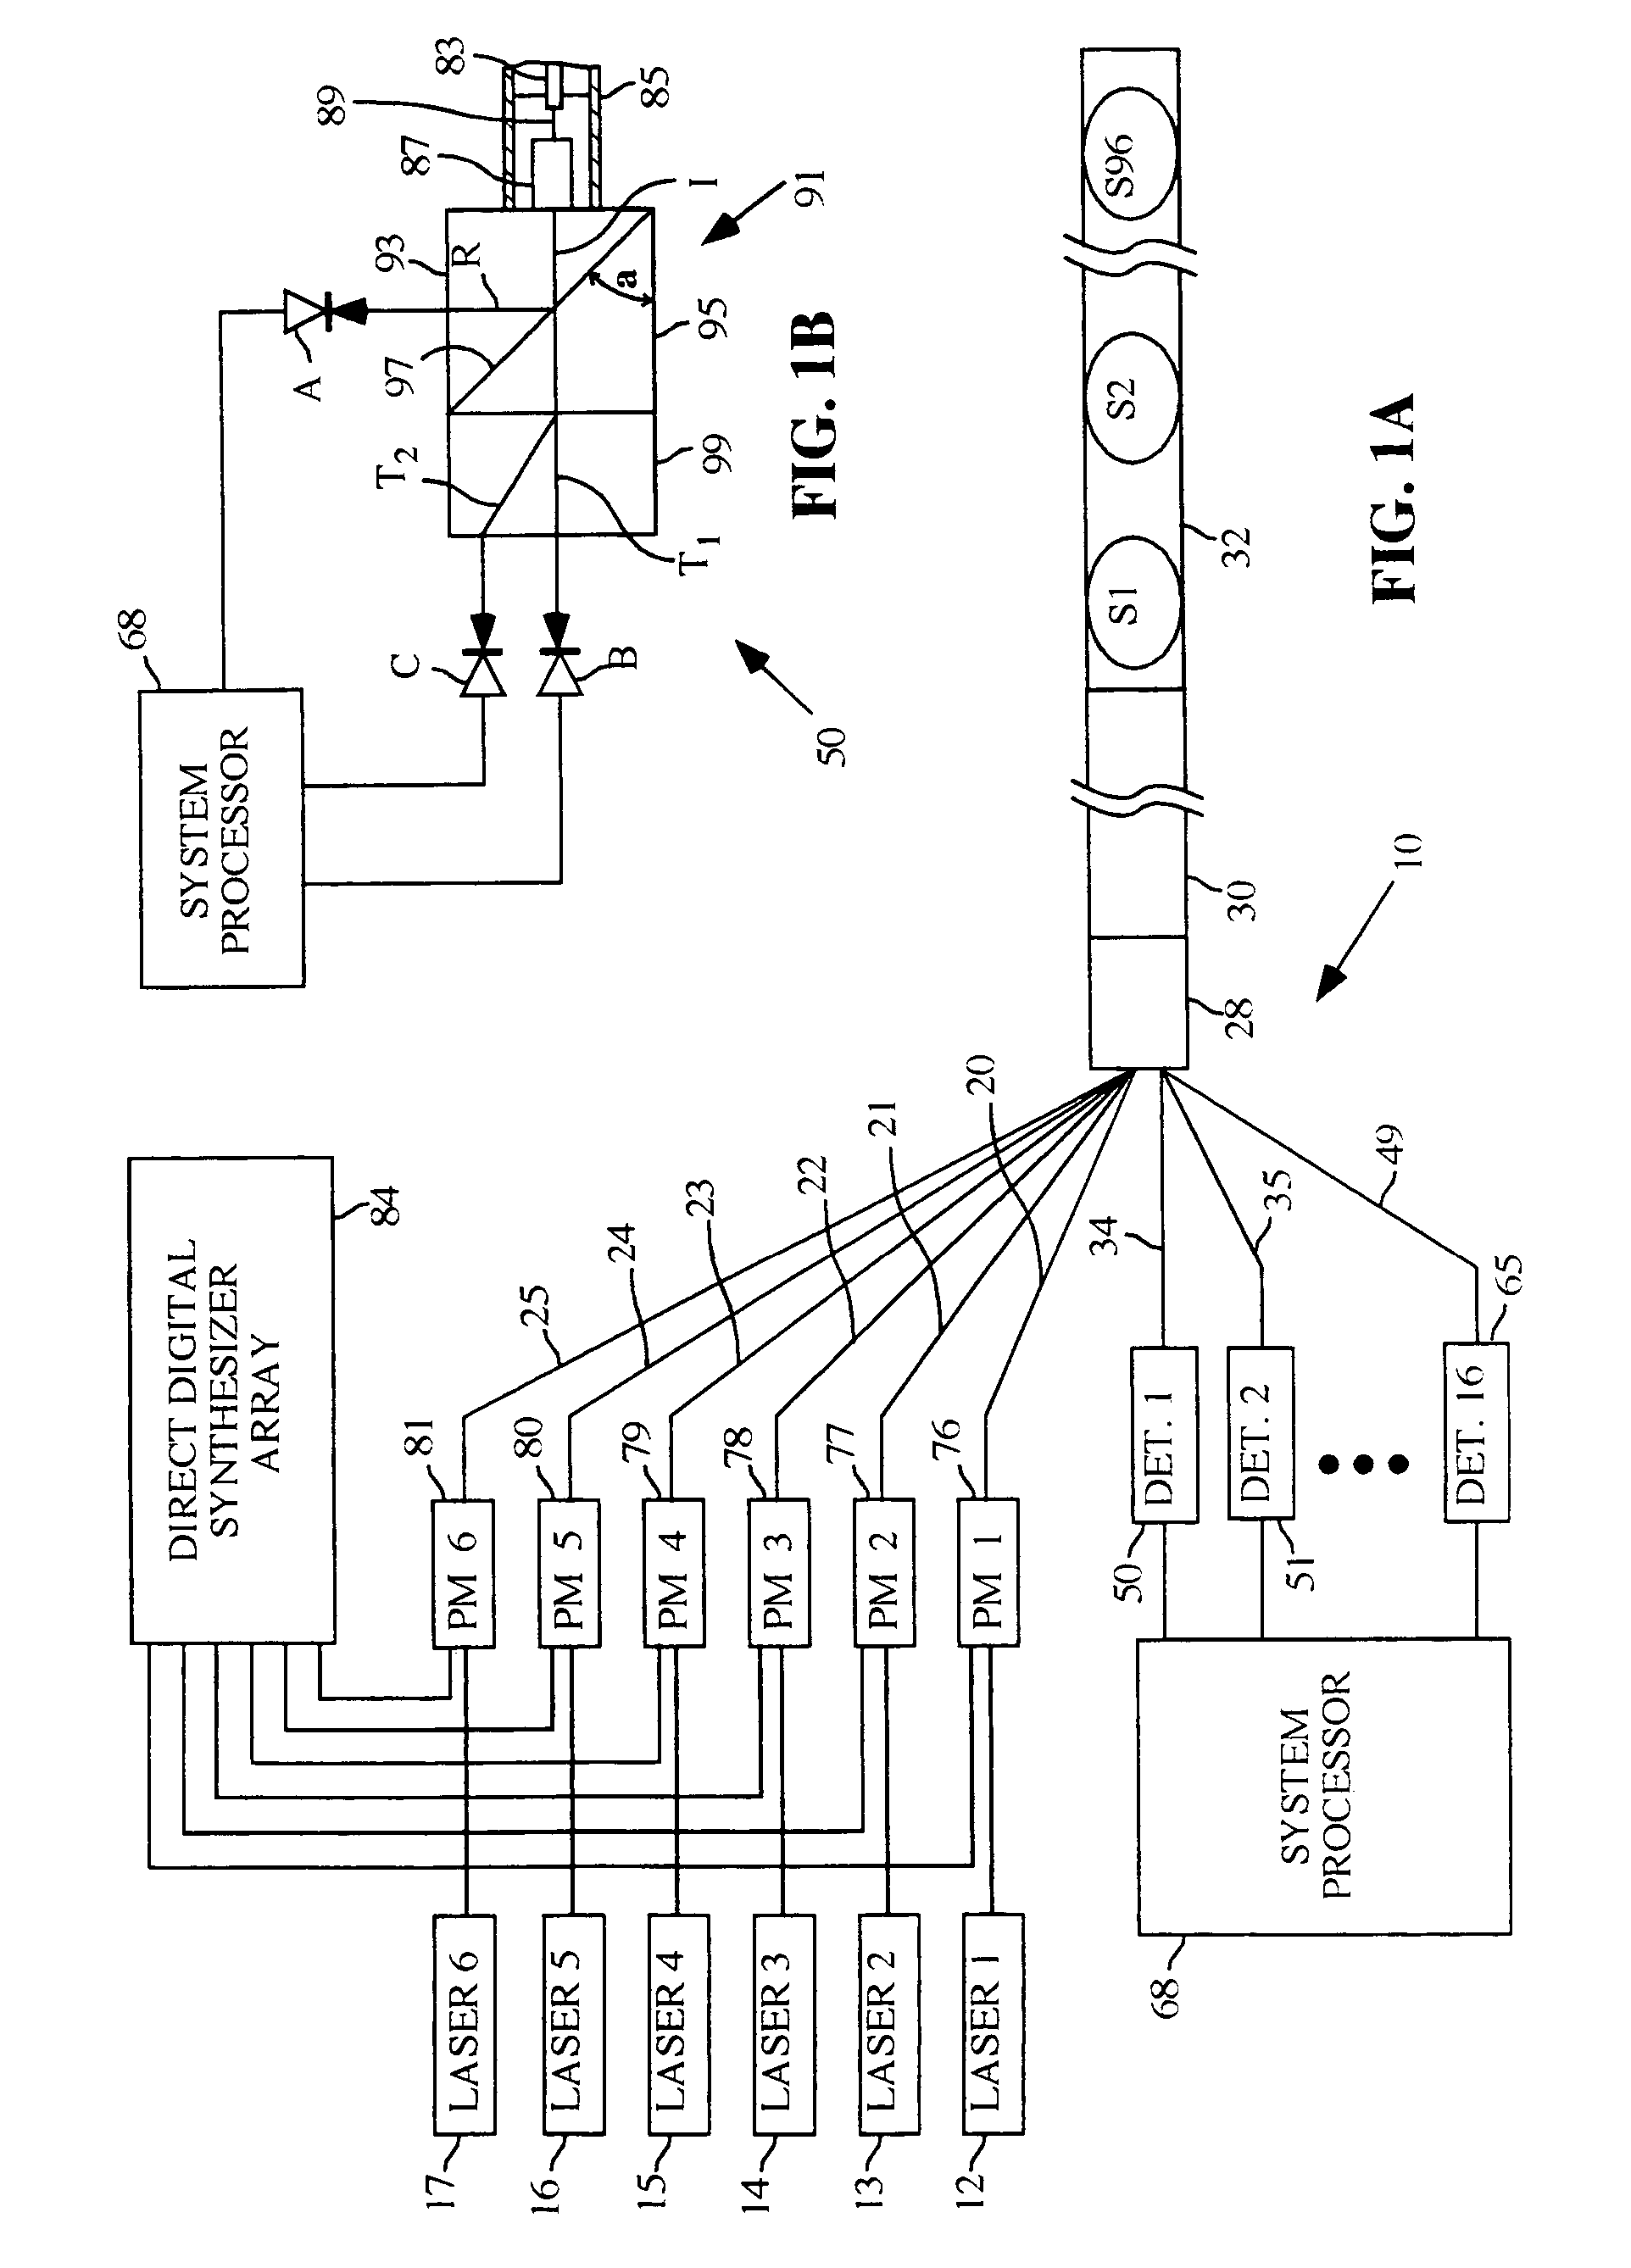 Multi-channel optical receiver for processing tri-cell polarization diversity detector outputs